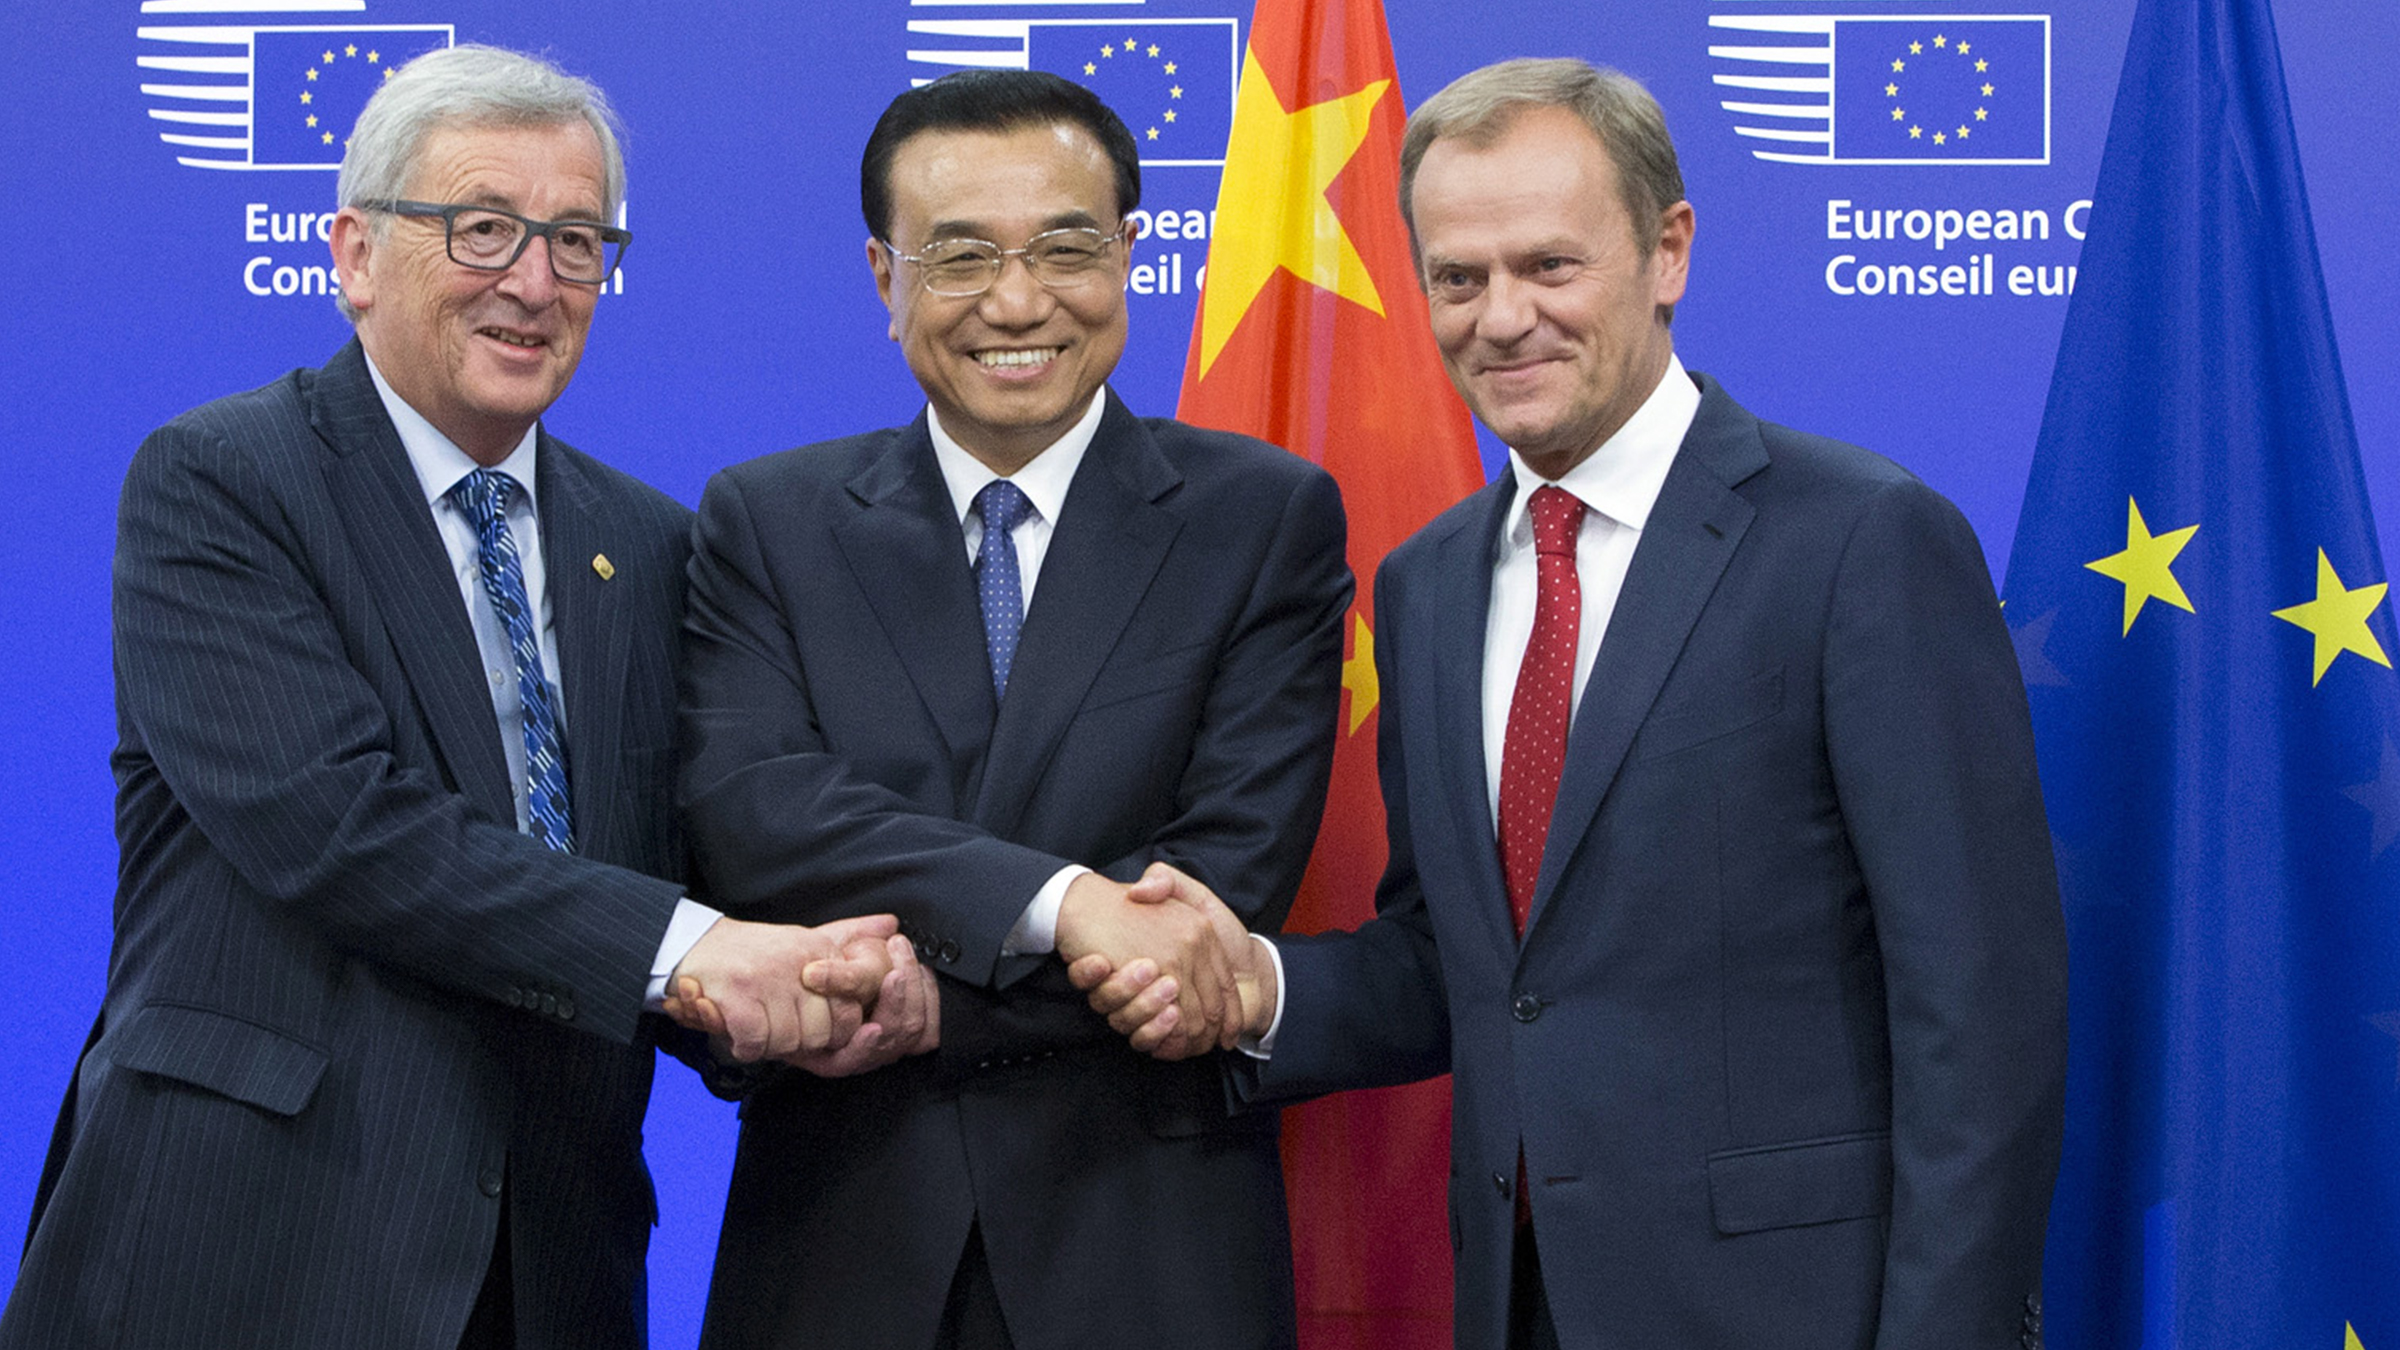 EU Commission President Jean-Claude Juncker (l.), China's Premier Li Keqiang (m.) and EU Council President Donald Tusk (r.) at the EU-China Summit in Brussels